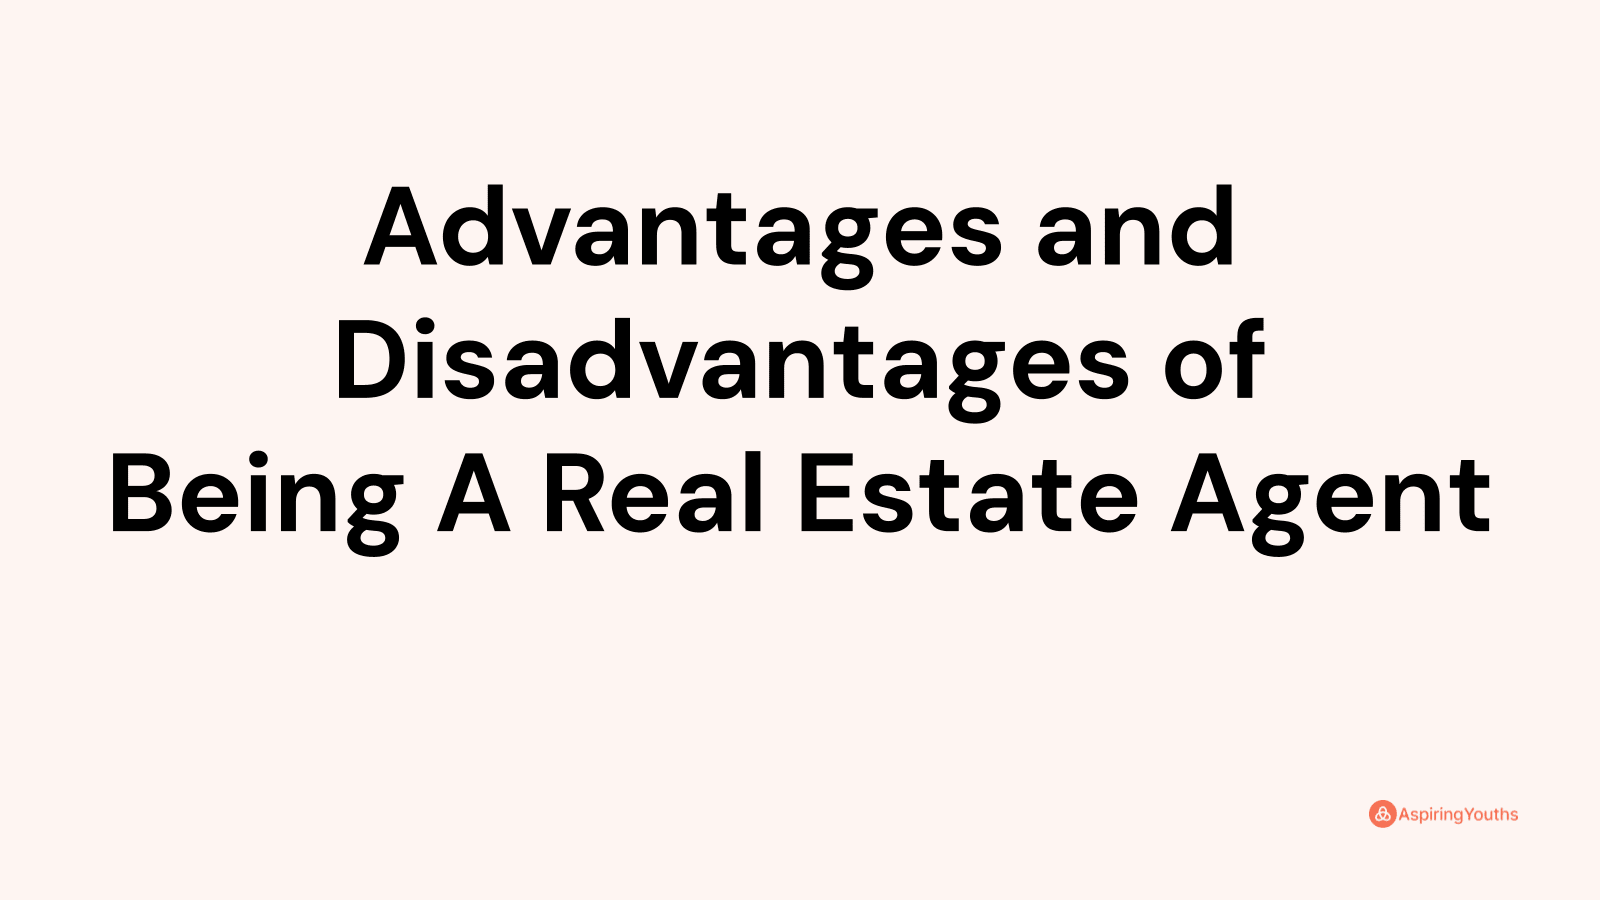 Advantages and disadvantages of Being A Real Estate Agent